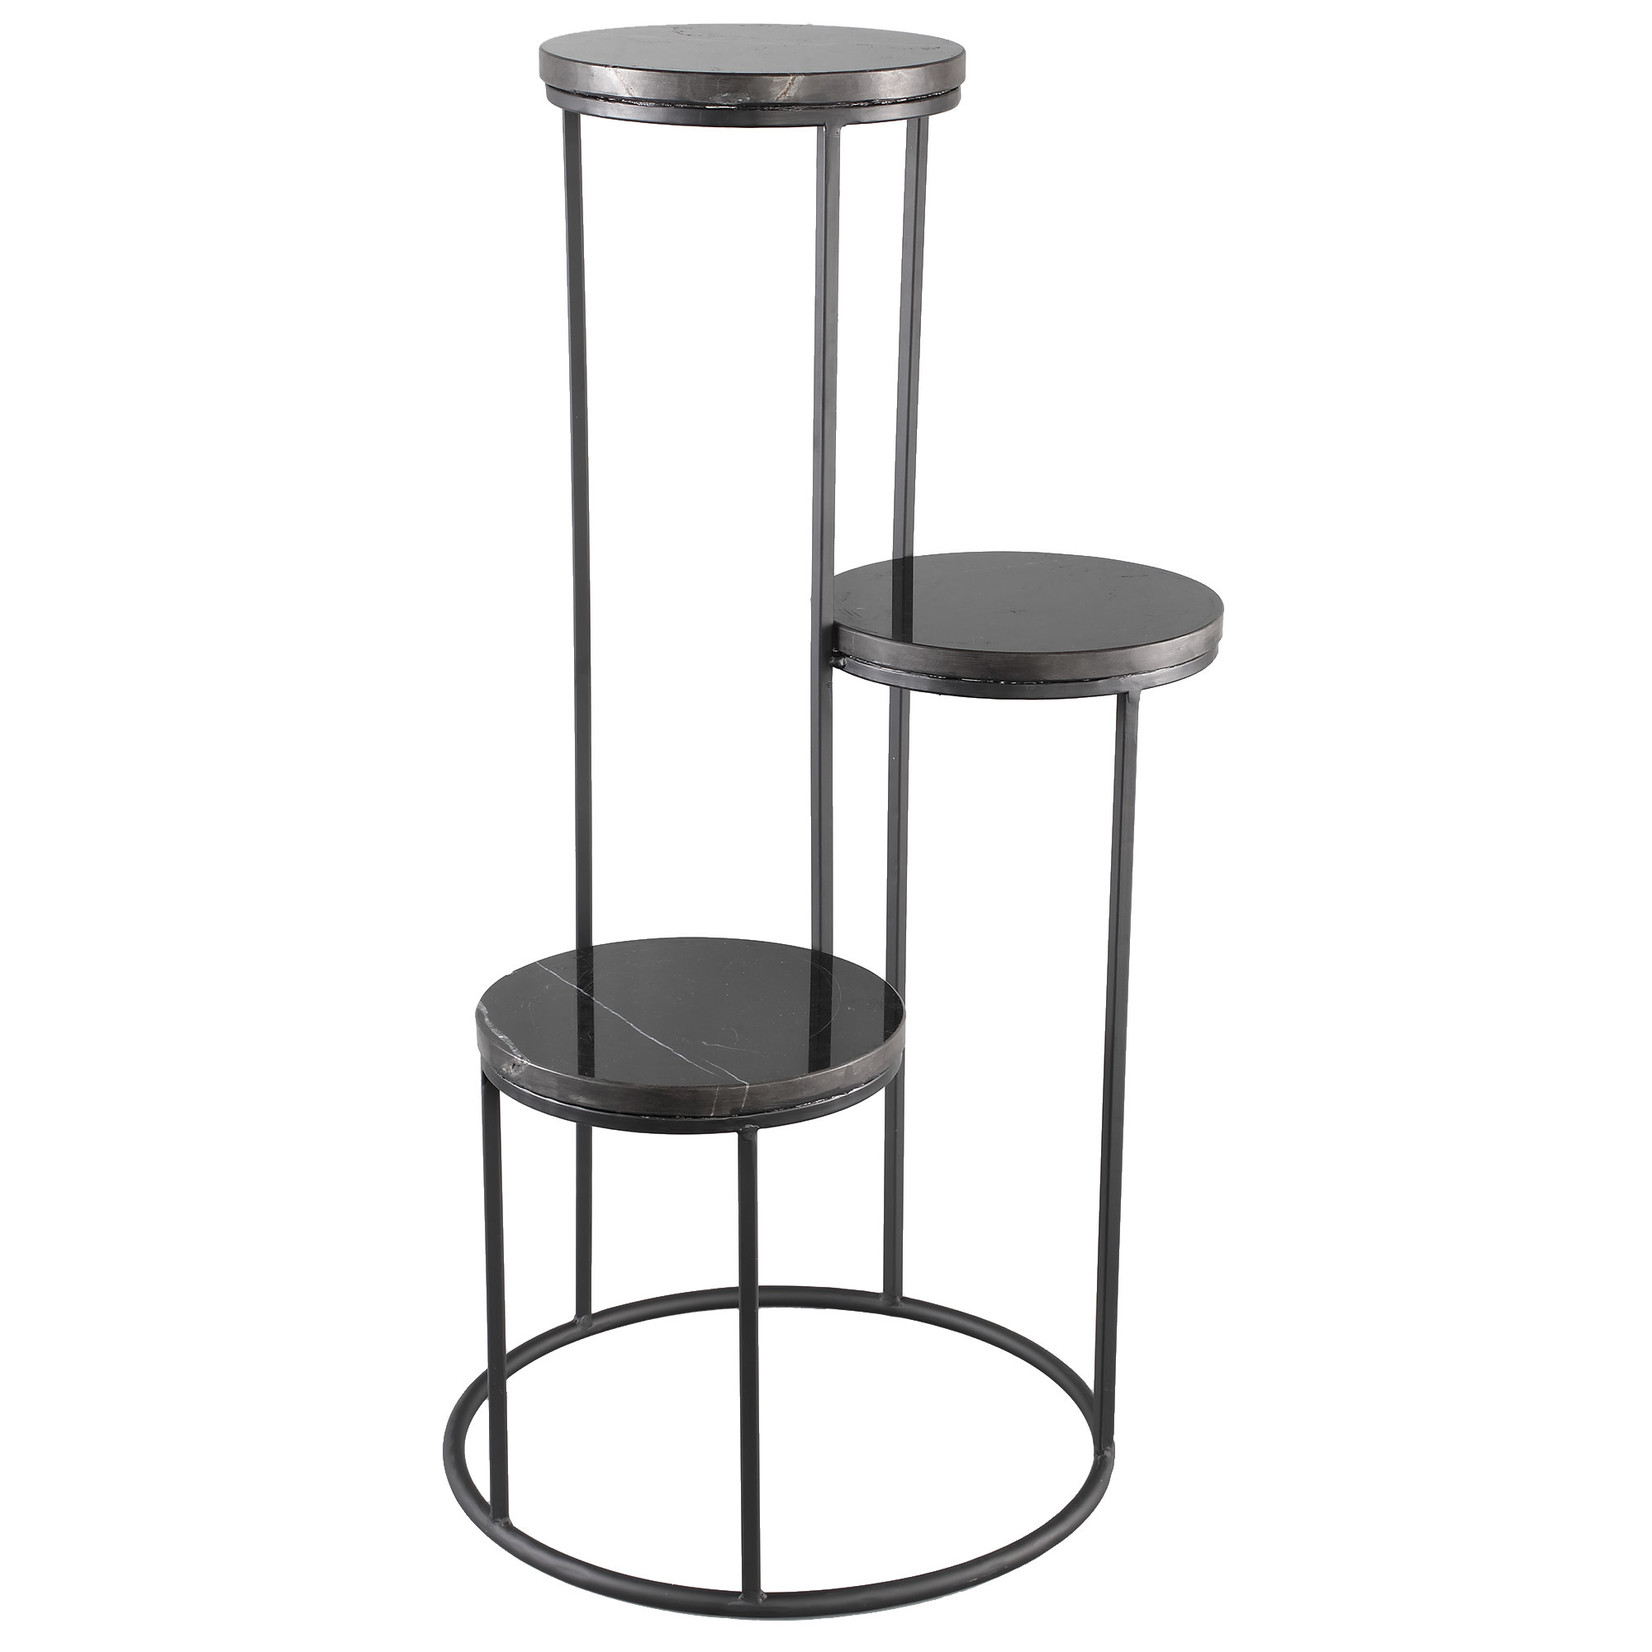 PTMD Hilde Black Marble display with three levels